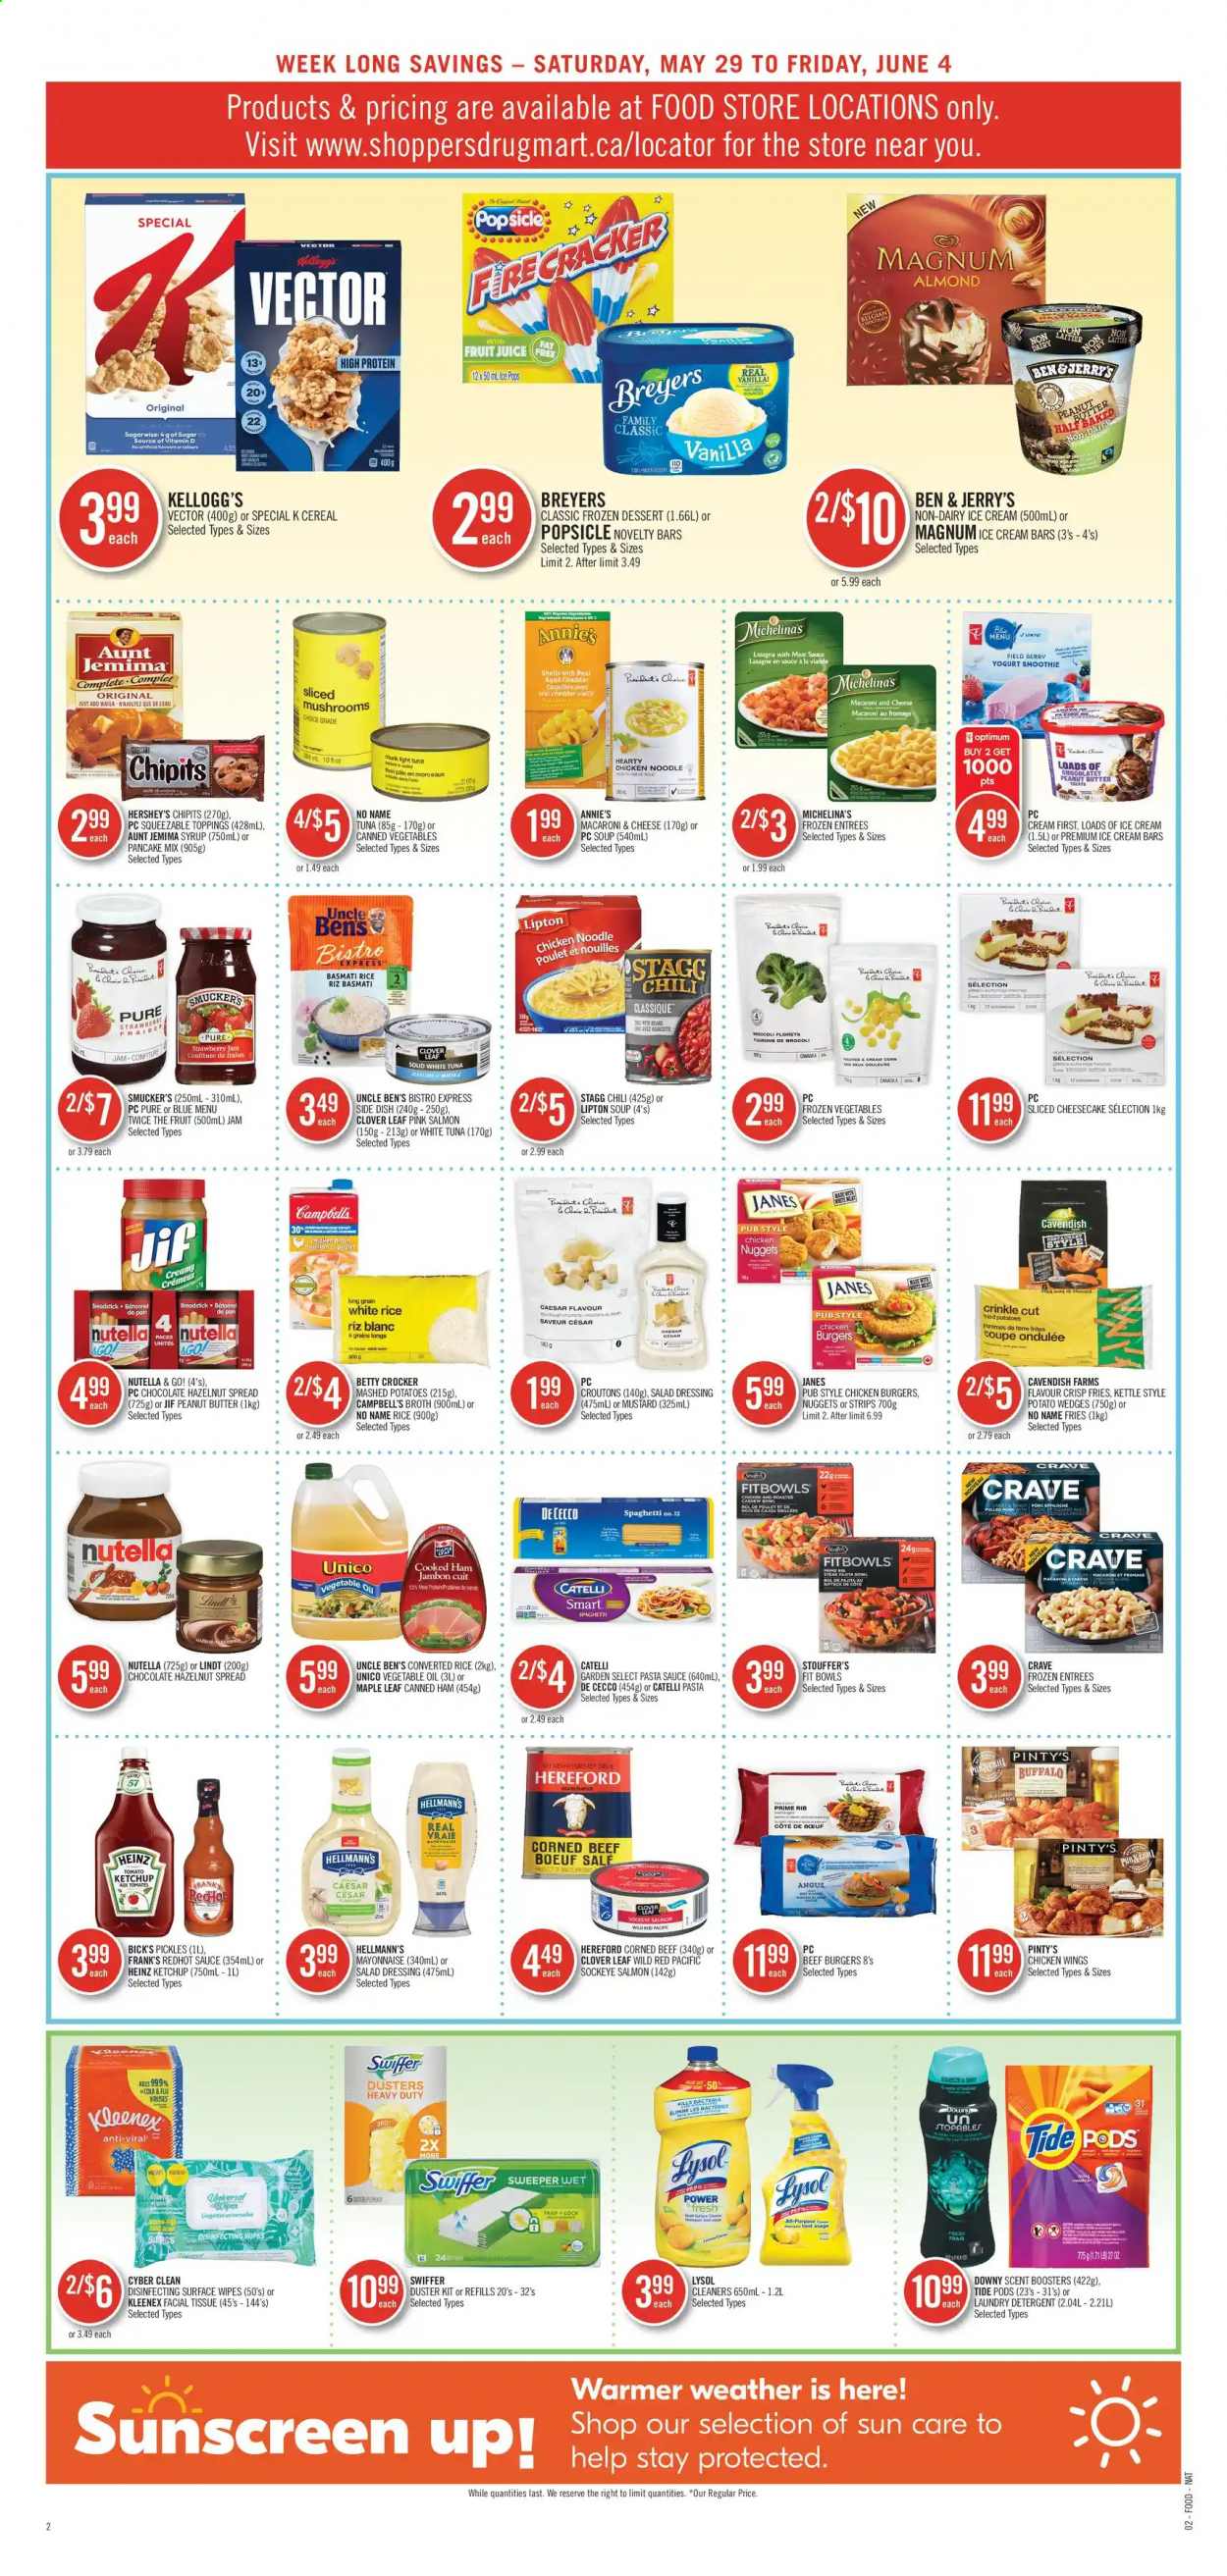 thumbnail - Shoppers Drug Mart Flyer - May 29, 2021 - June 04, 2021 - Sales products - Kellogg's, Hershey's, Annie's, croutons, pancakes, broth, corn, corned beef, salmon, strawberry jam, Heinz, pickles, pasta sauce, soup, canned vegetables, mushrooms, sauce, Uncle Ben's, cereals, basmati rice, rice, spaghetti, white rice, noodles, Campbell's, mustard, salad dressing, dressing, Hellmann’s, vegetable oil, oil, fruit jam, peanut butter, syrup, hazelnut spread, Jif, juice, fruit juice, Clover, smoothie, wipes, Kleenex, tissues, Lysol, Swiffer, Tide, laundry detergent, scent booster, Cold & Flu, Go!, tuna, Nutella. Page 4.